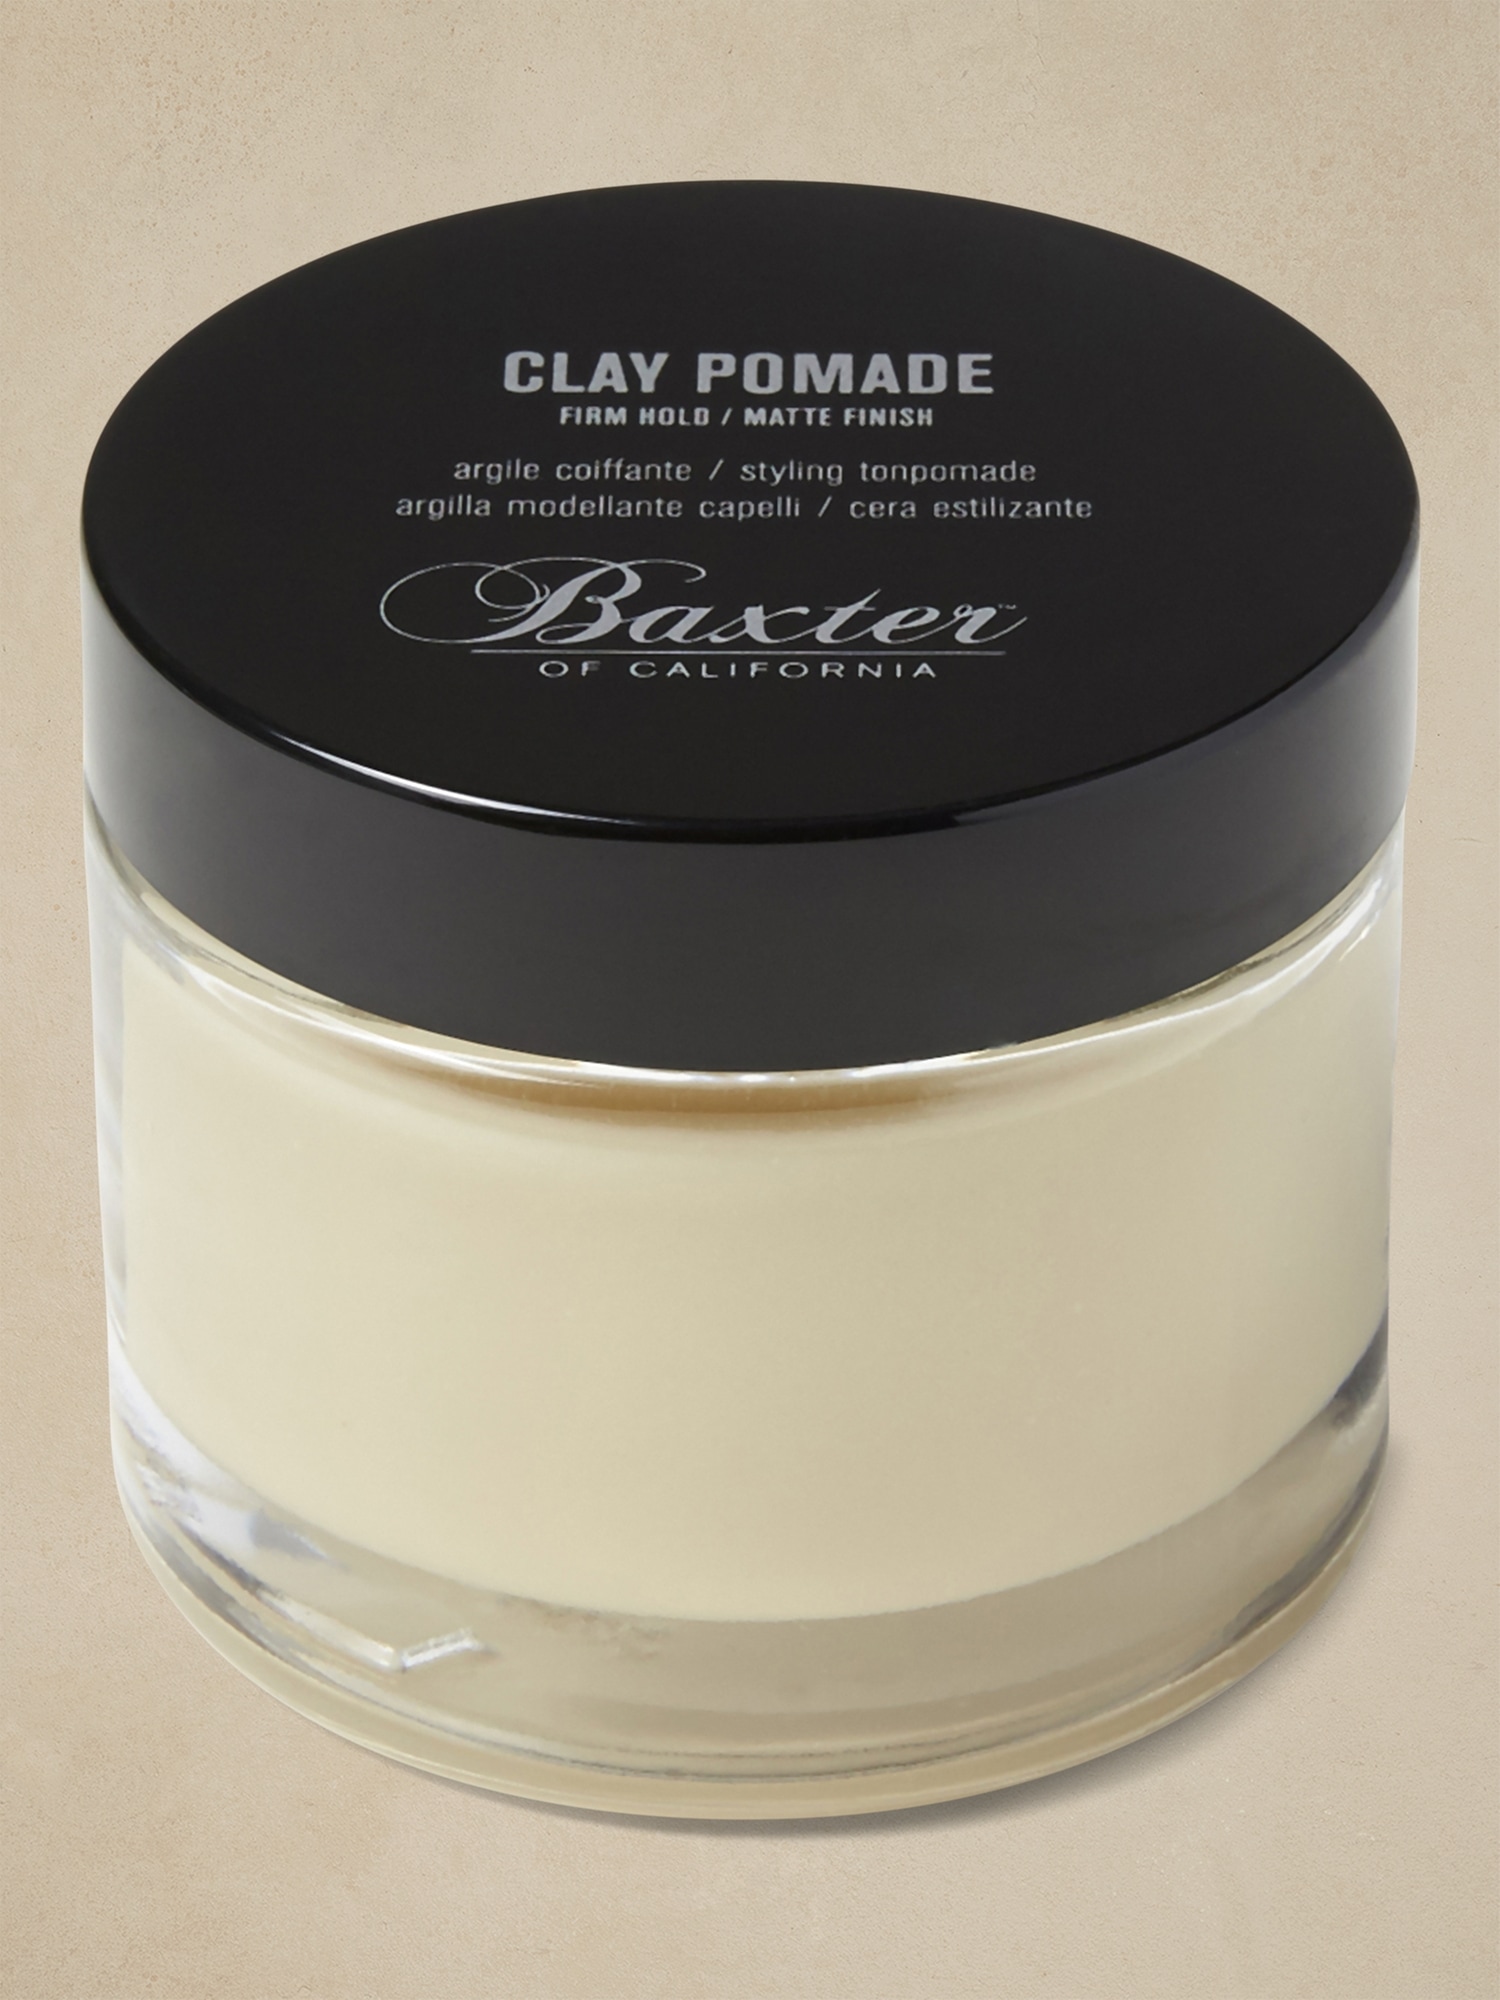 Baxter of California &#124 Clay Pomade